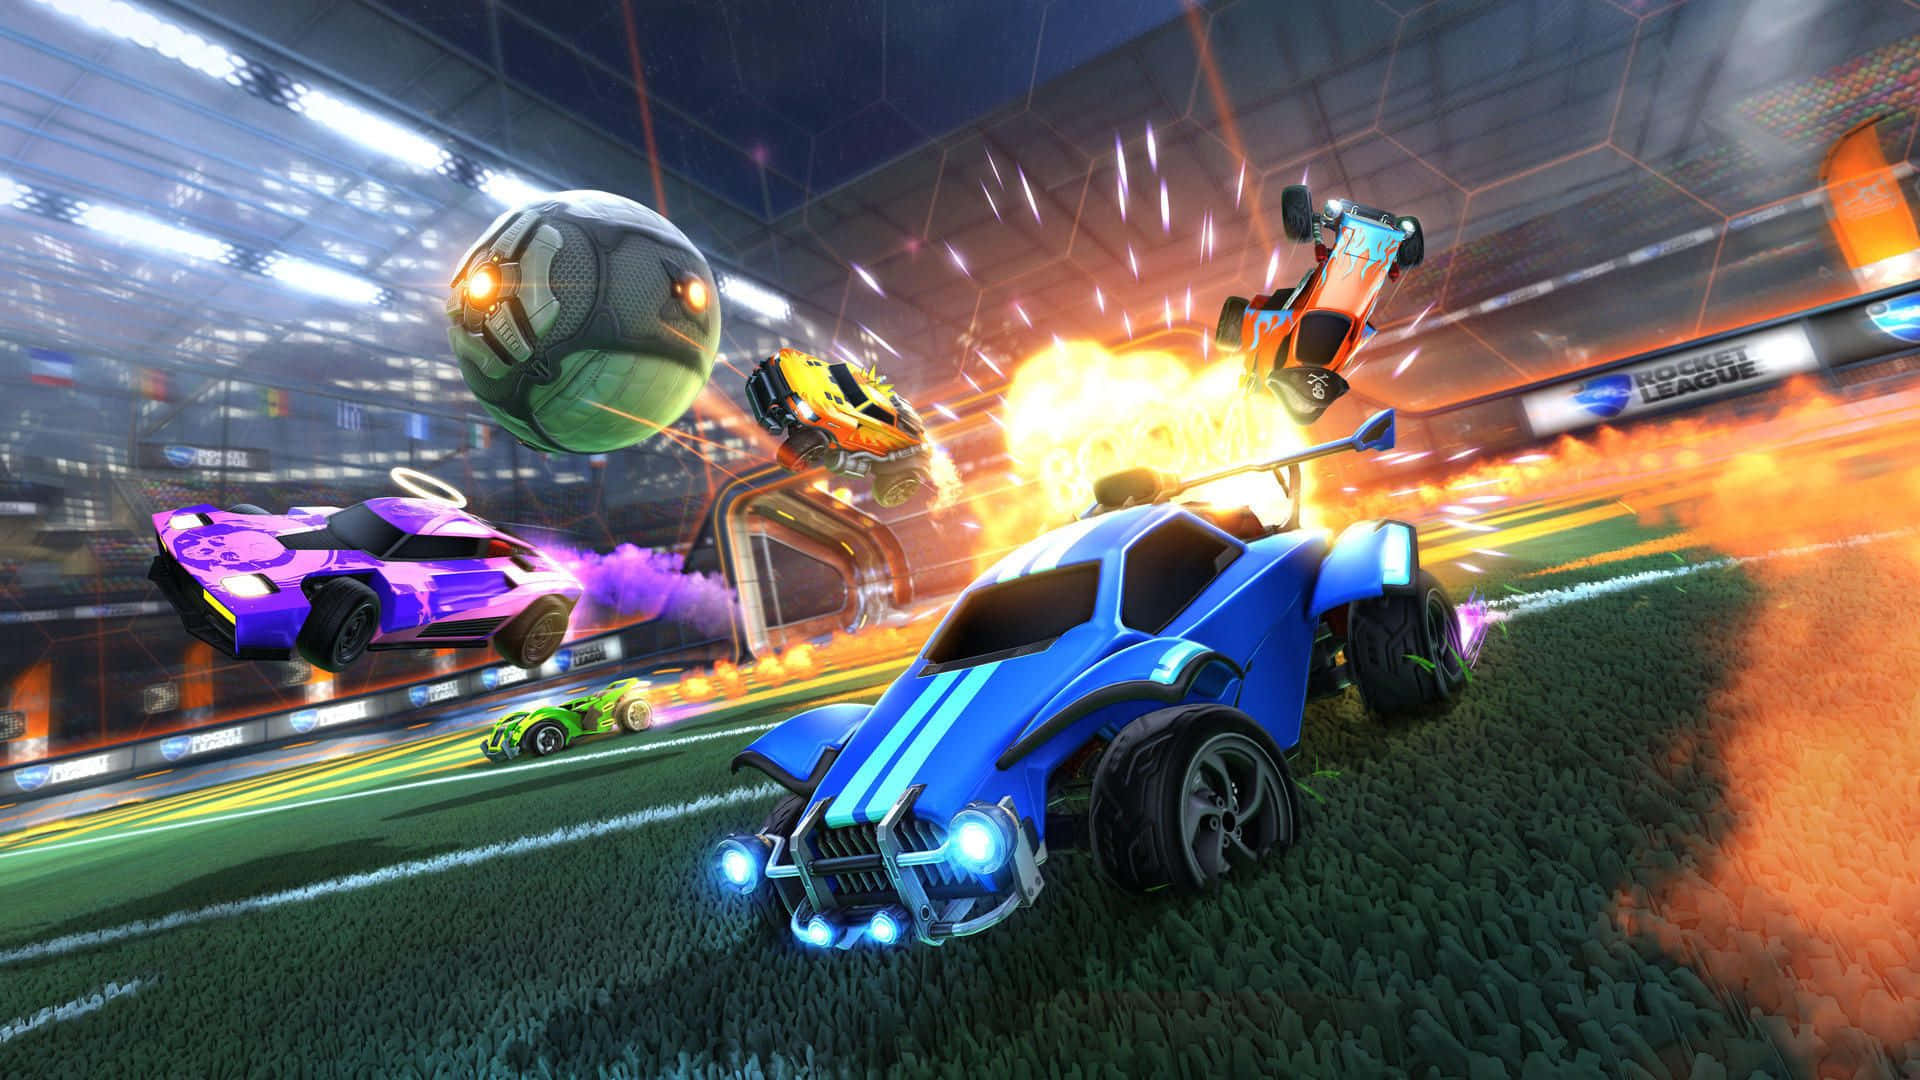 Get Ready for Some Explosive Action with HD Rocket League